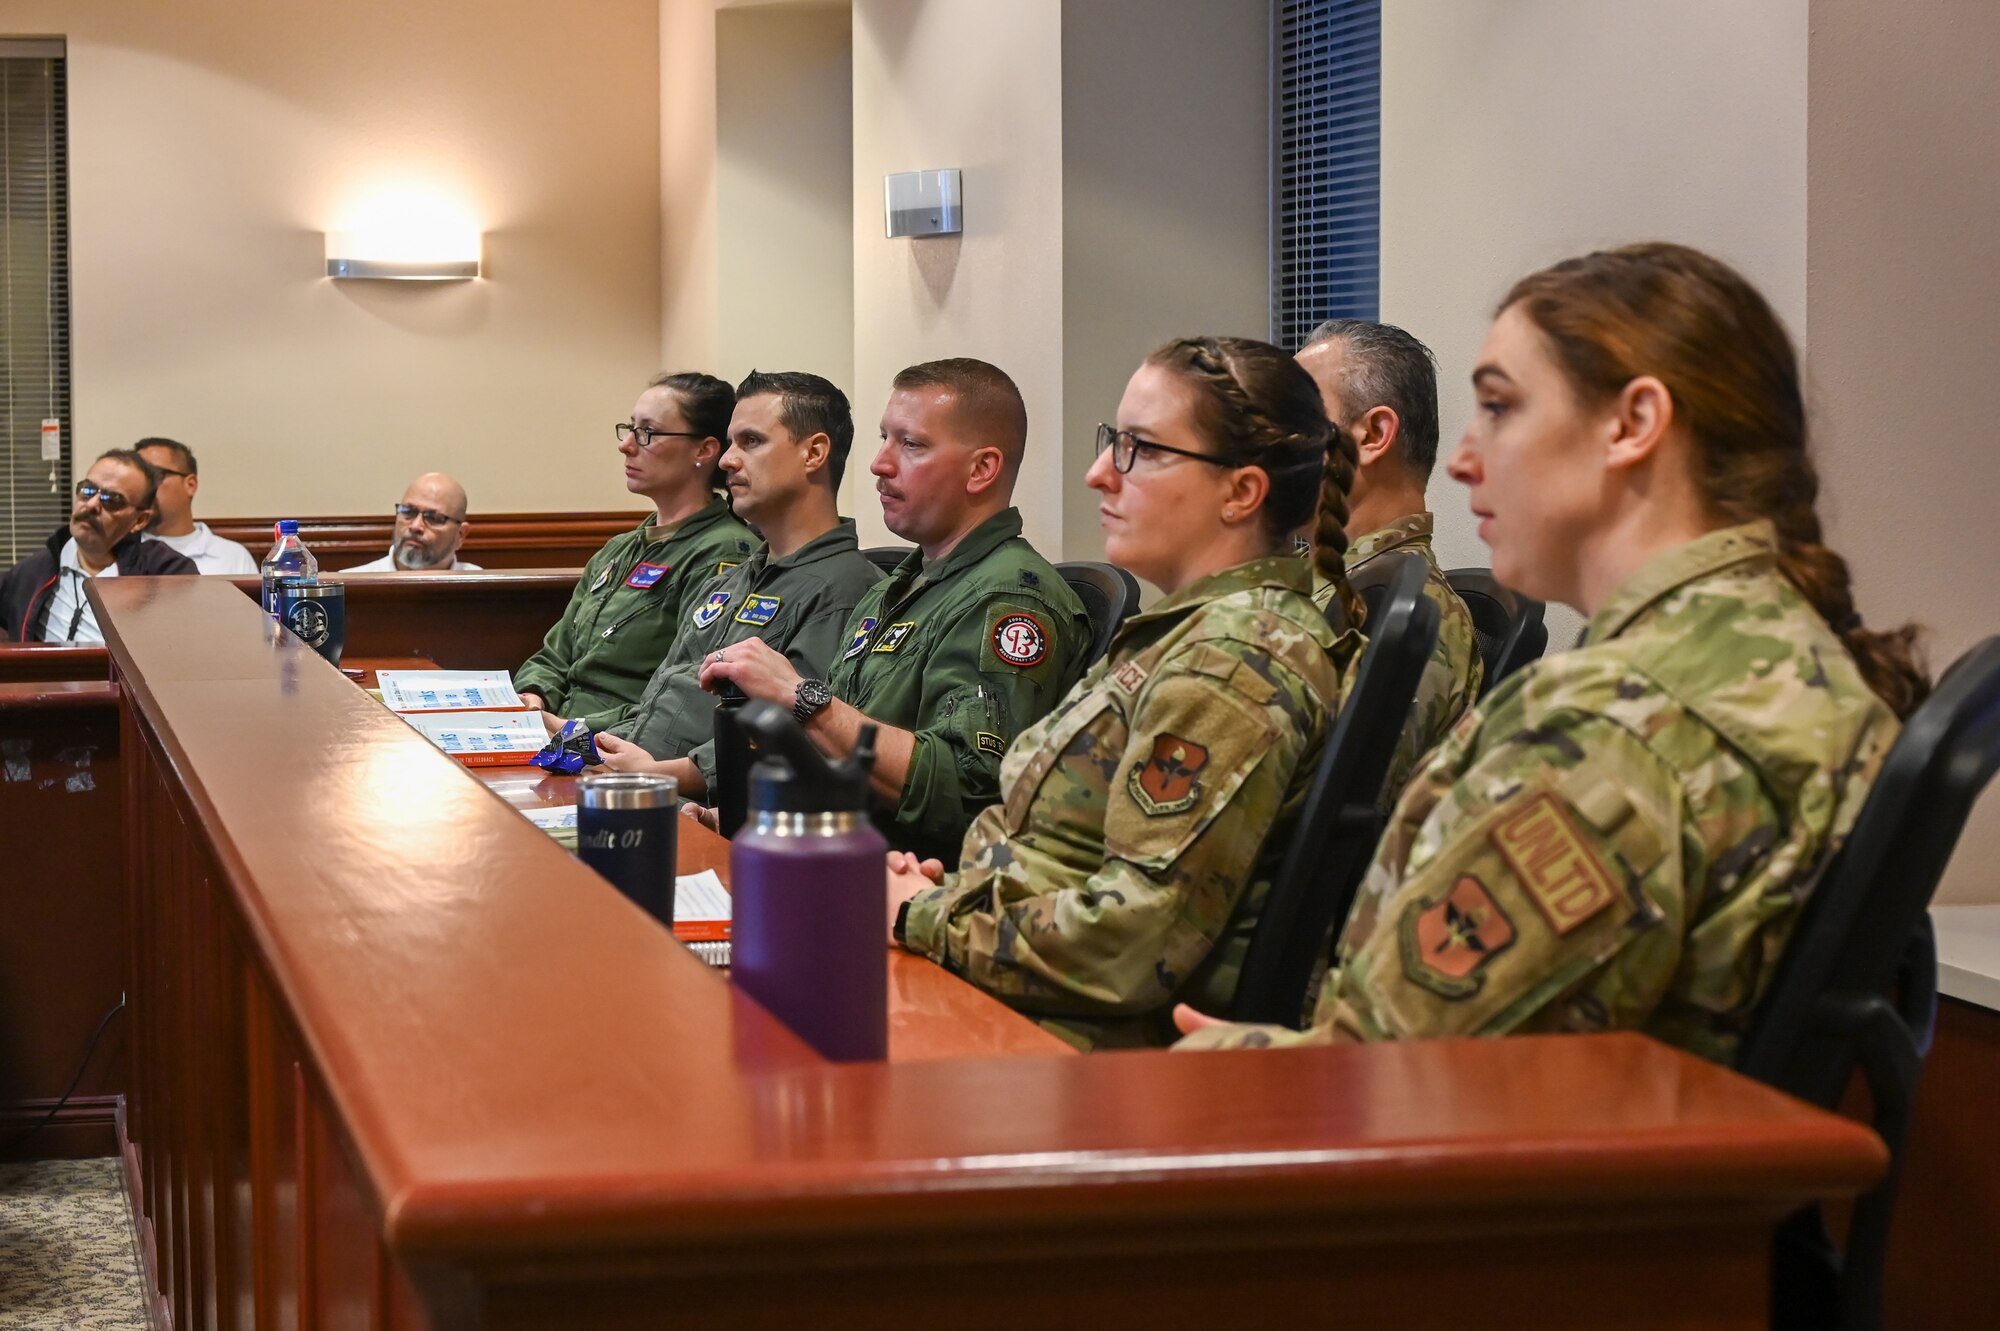 U.S. Air Force commanders of Team XL participate in a professional development discussion focused on the importance of feedback at Laughlin Air Force Base, Texas, on March 22, 2023. Through collaboration and open communication, the team worked to develop their skills and knowledge as leaders within the Air Force. (U.S. Air Force photo by Airman 1st Class Keira Rossman)